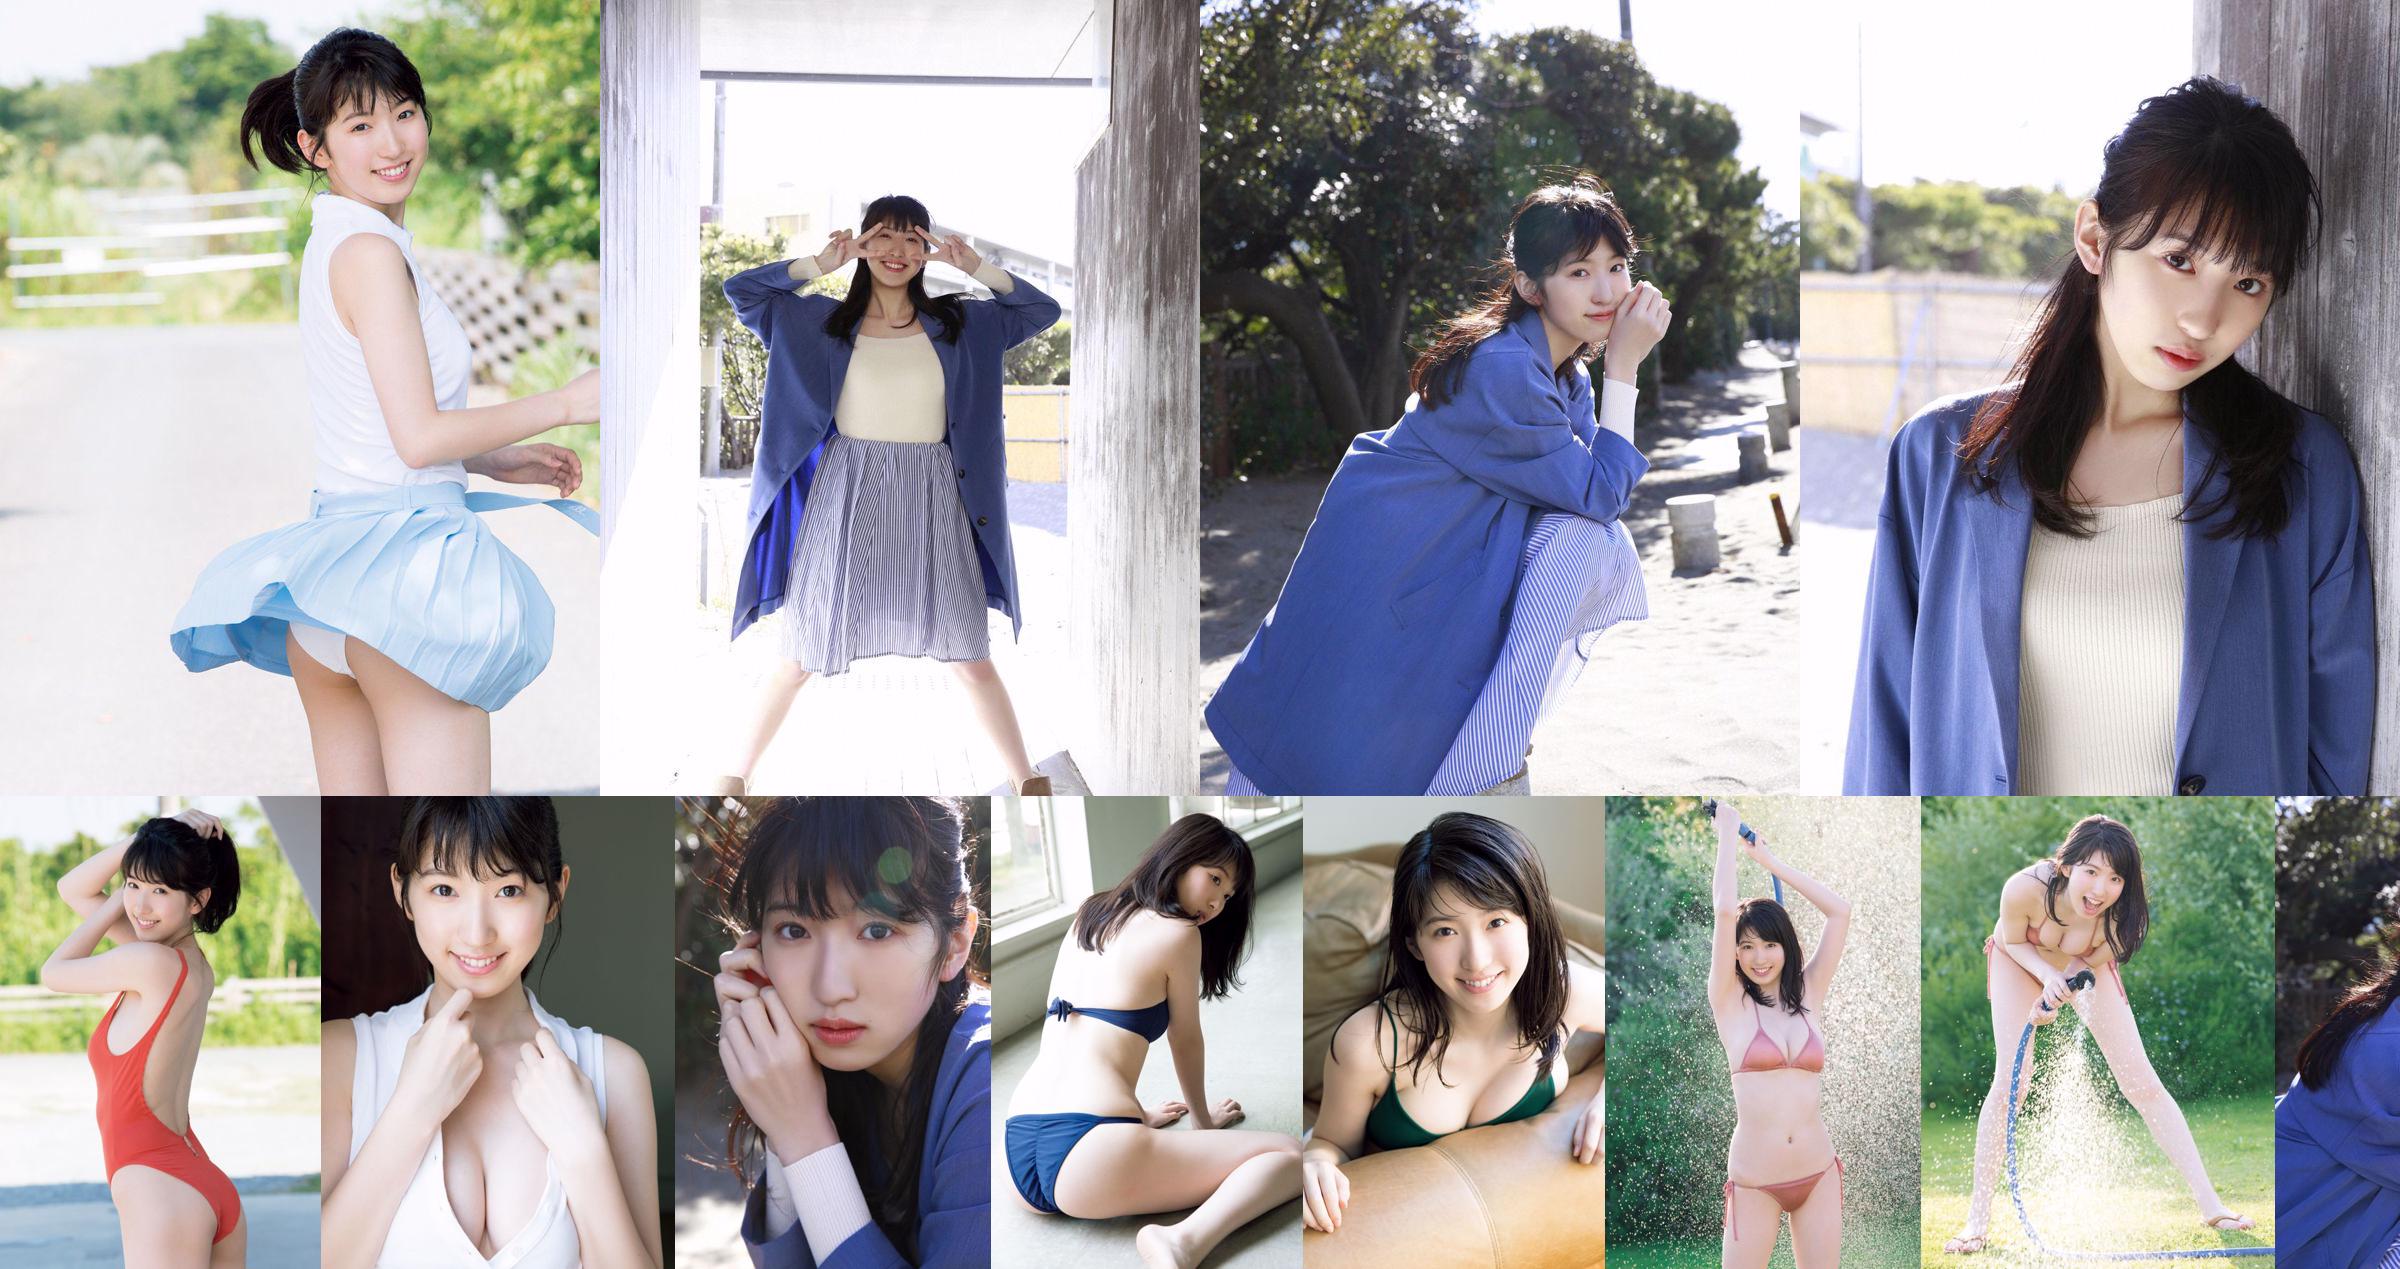 [FRIDAY] 《Shuka Saito 22-year-old first swimsuit exclusive release of the treasured cut of a popular big explosion voice actor》 Photo No.7417fa Page 2